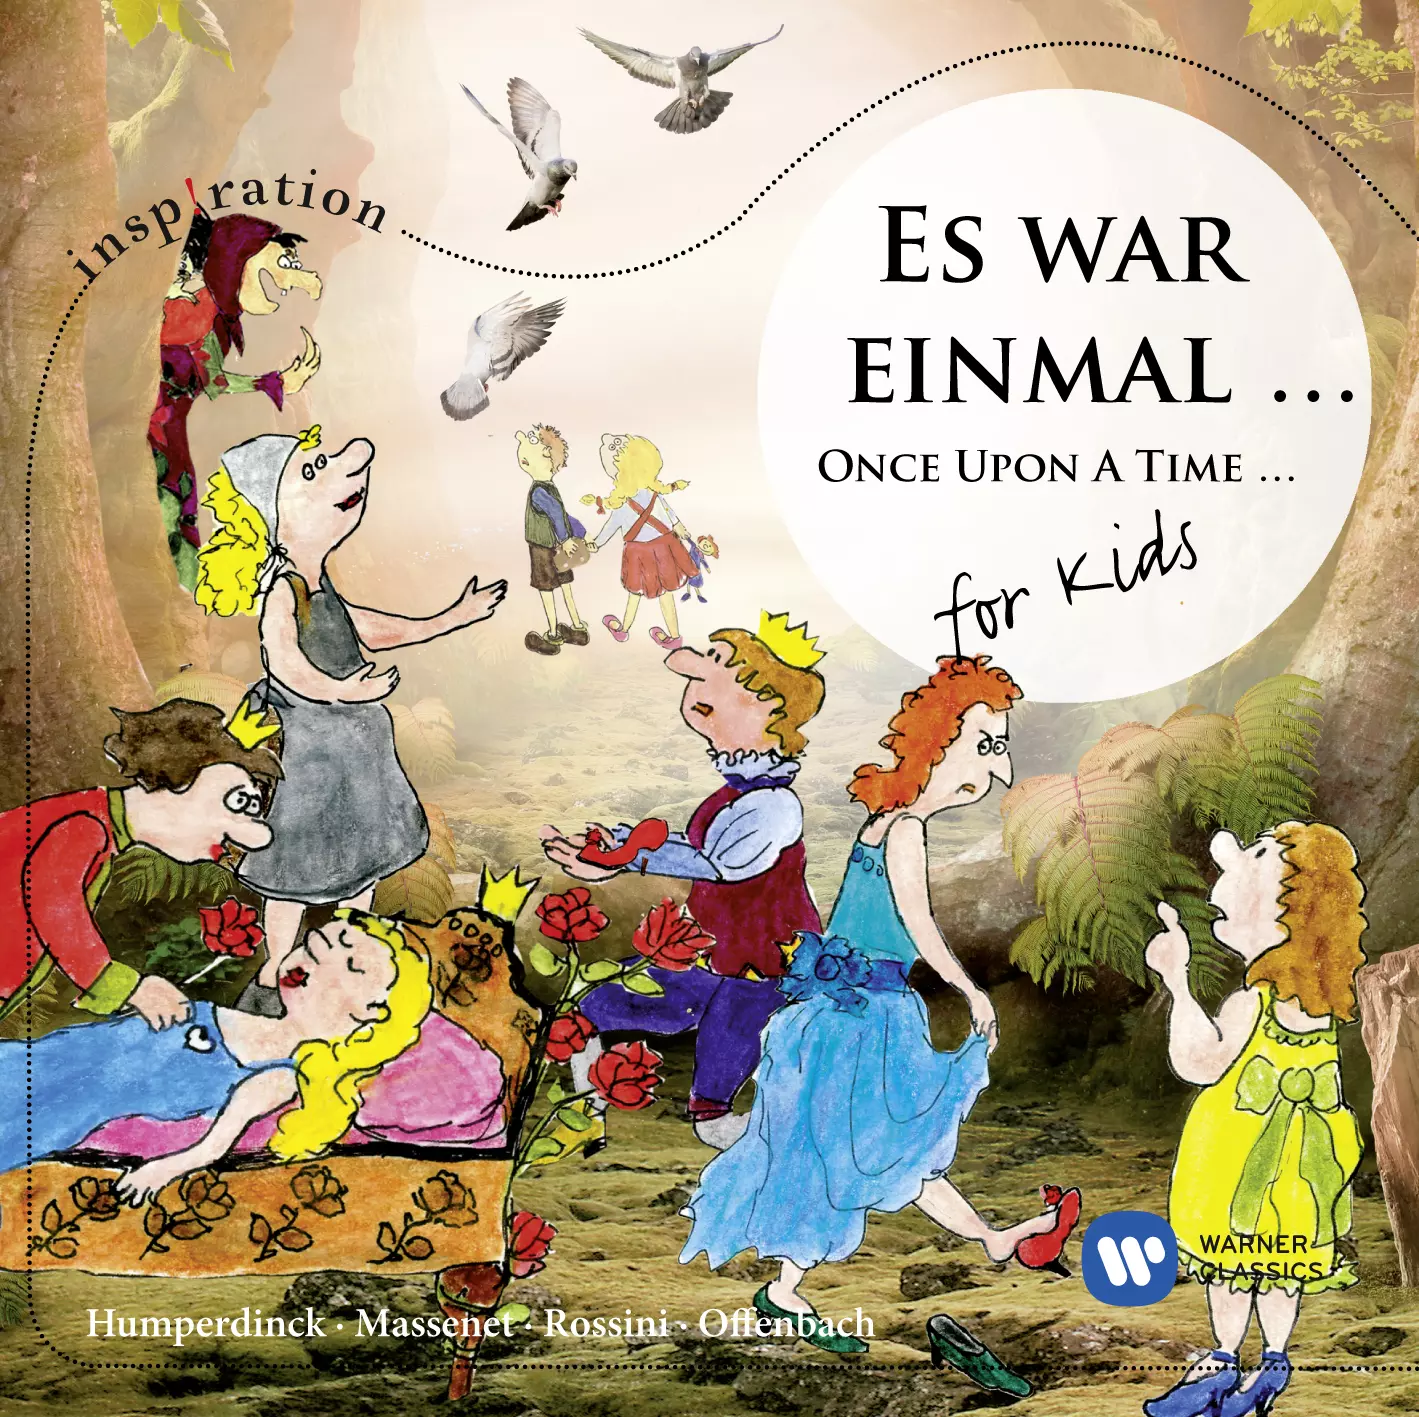 Es war einmal ... / Once Upon A Time ... For Kids